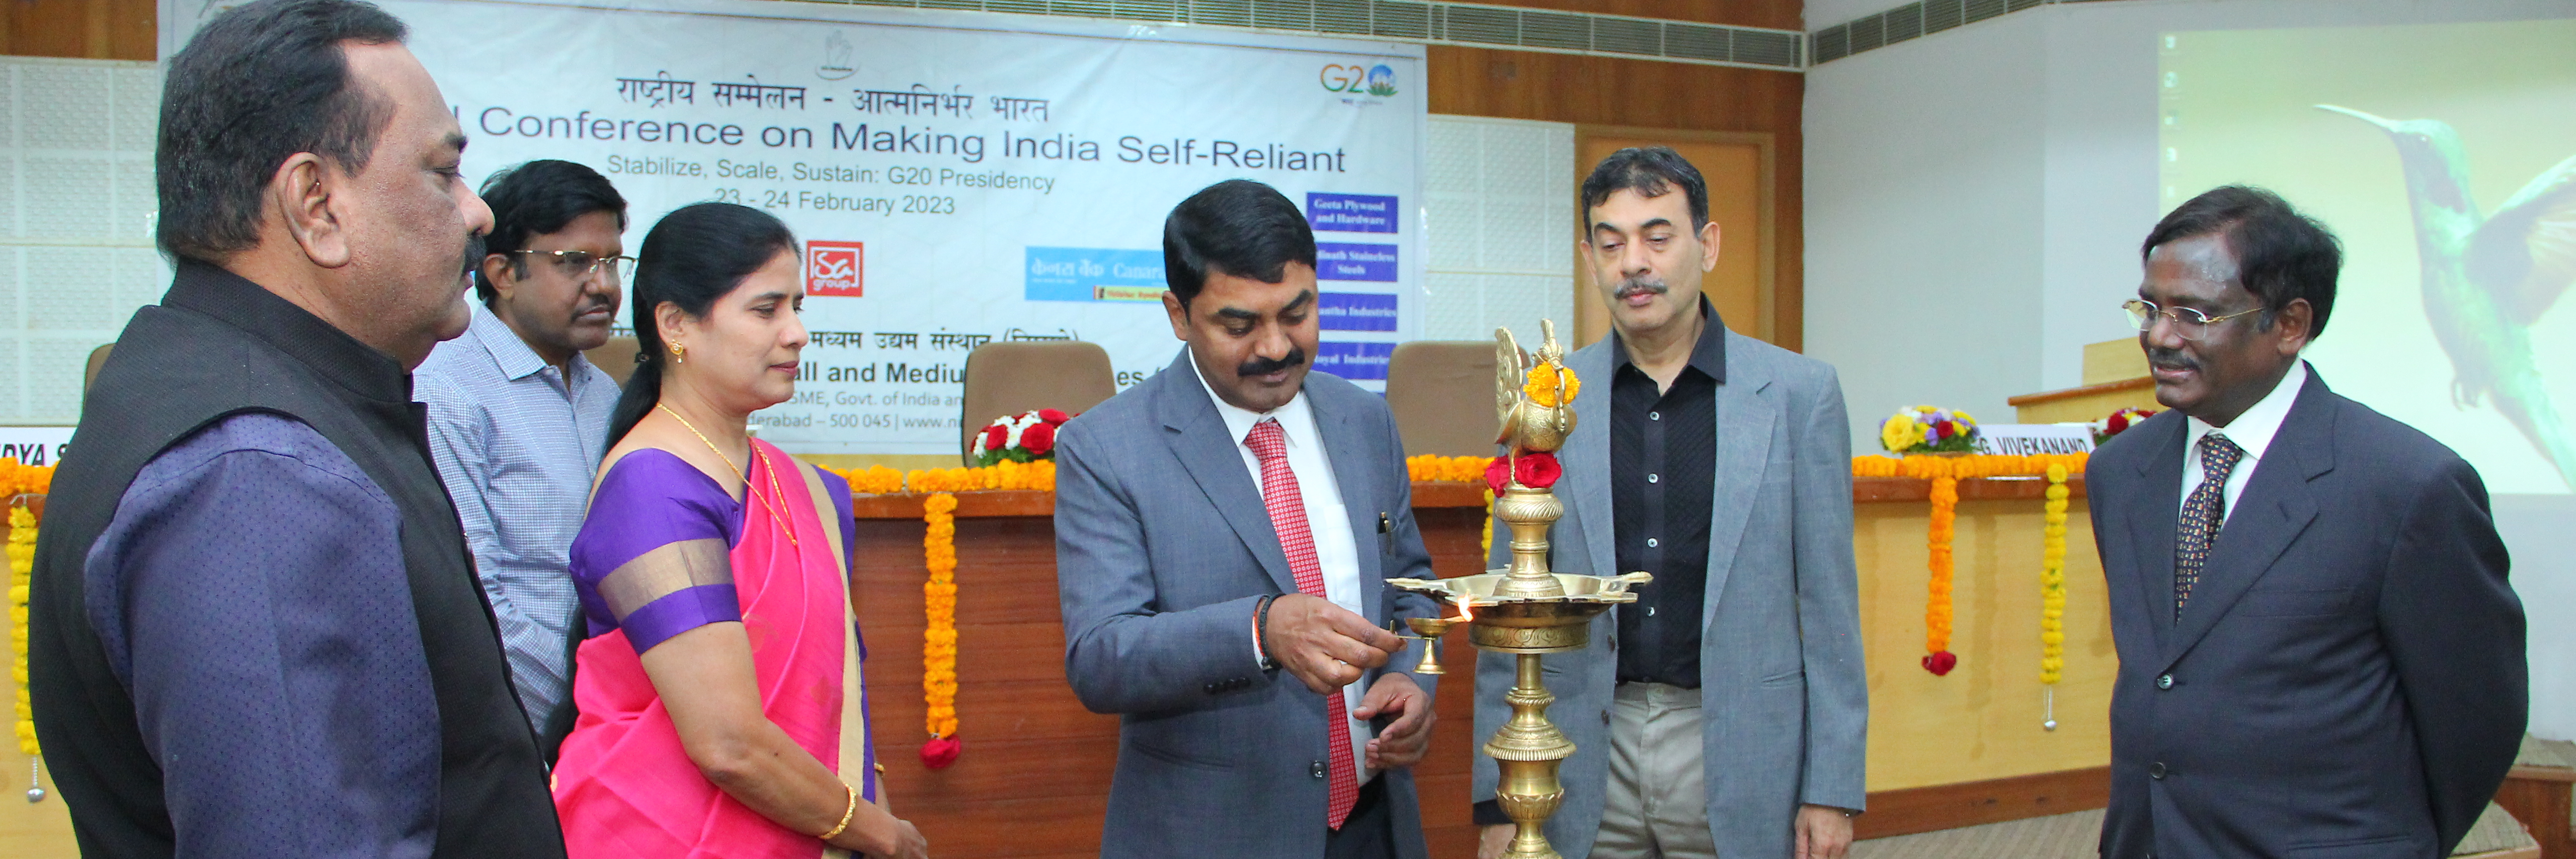 Inauguration of National Conference on making India Self-Reliant under the august presence of Shri. Dr. G. Sateesh Reddy, Scientific Adviser to Defence Minister, Govt of India